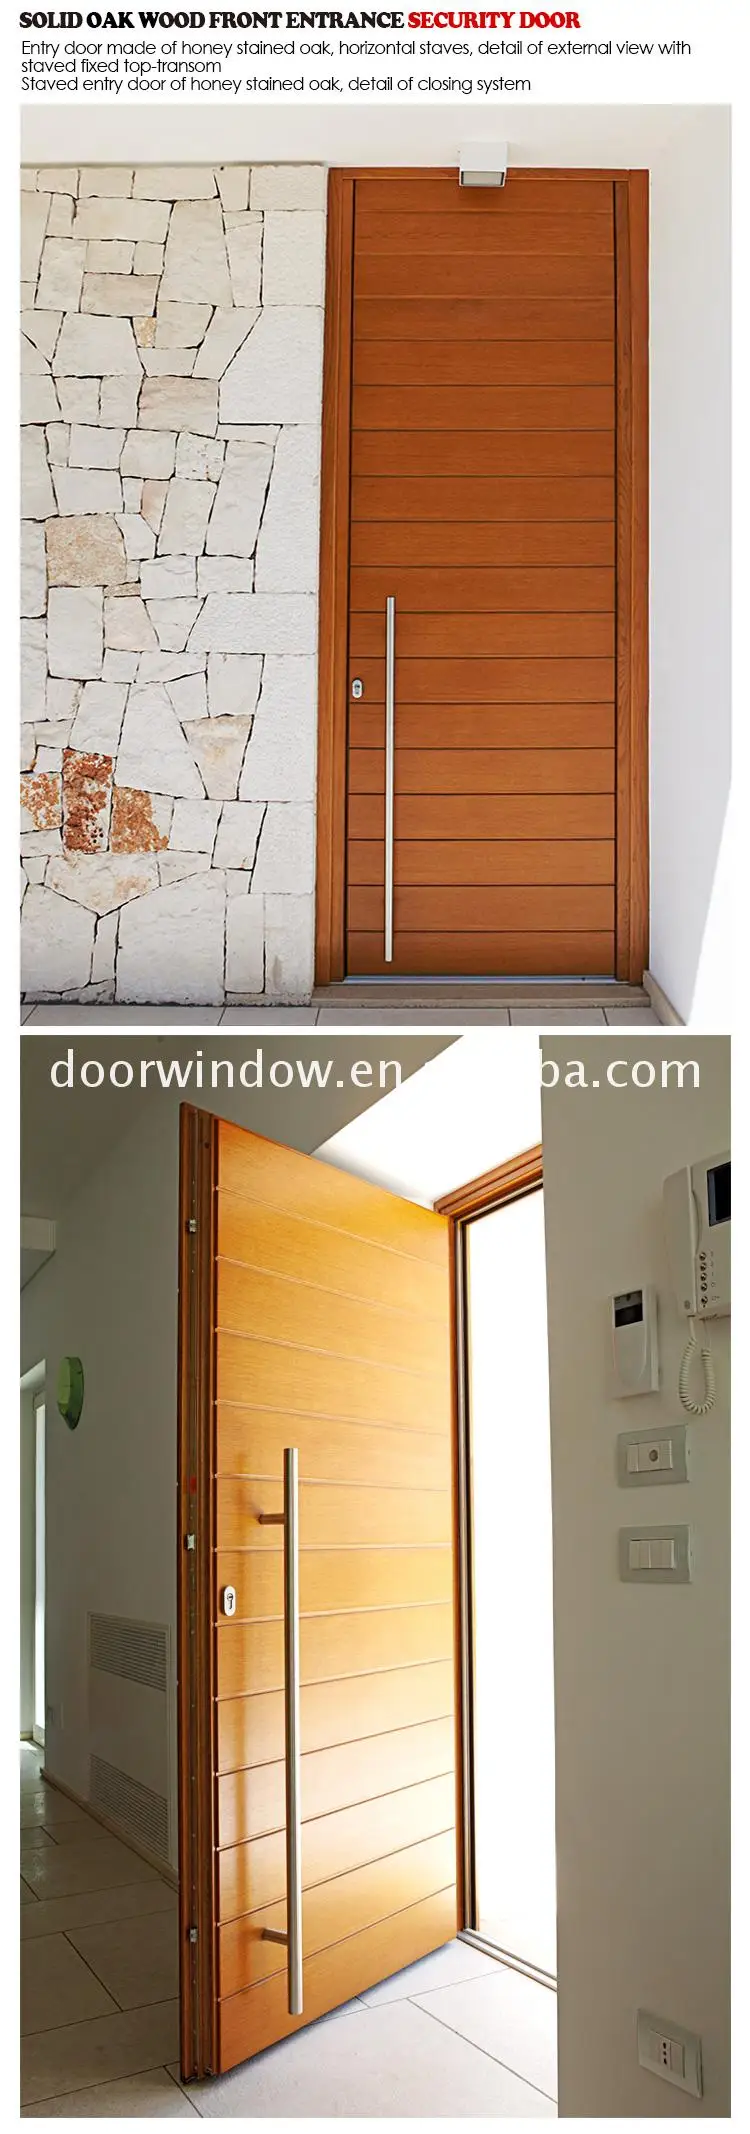 Factory cheap price lowes security door installation cost garage entry doors reviews